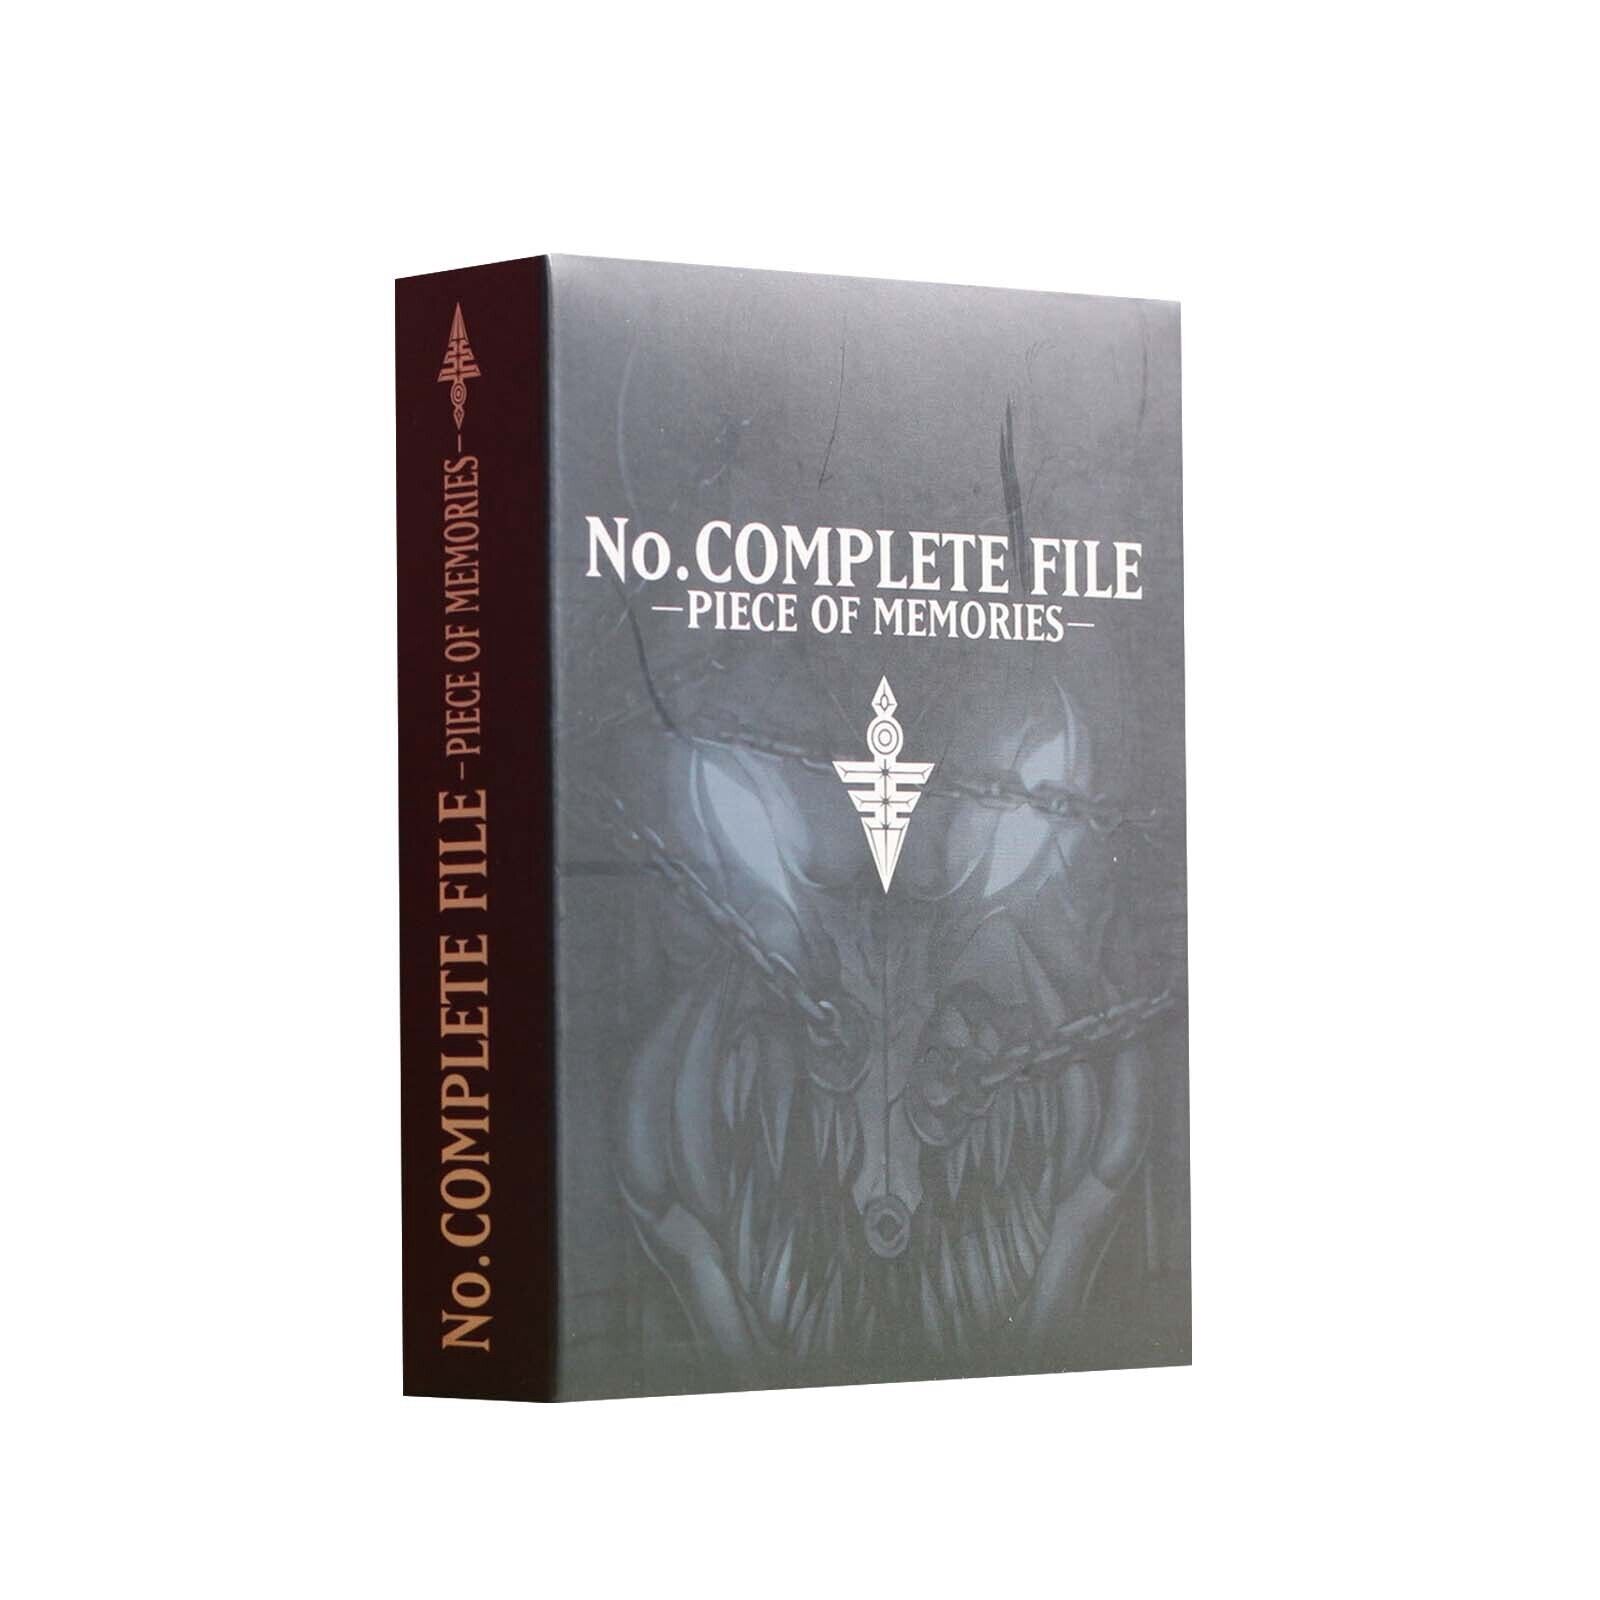 Yu-Gi-Oh Duel Monsters No. Complete File Piece Of Memories First Limited 